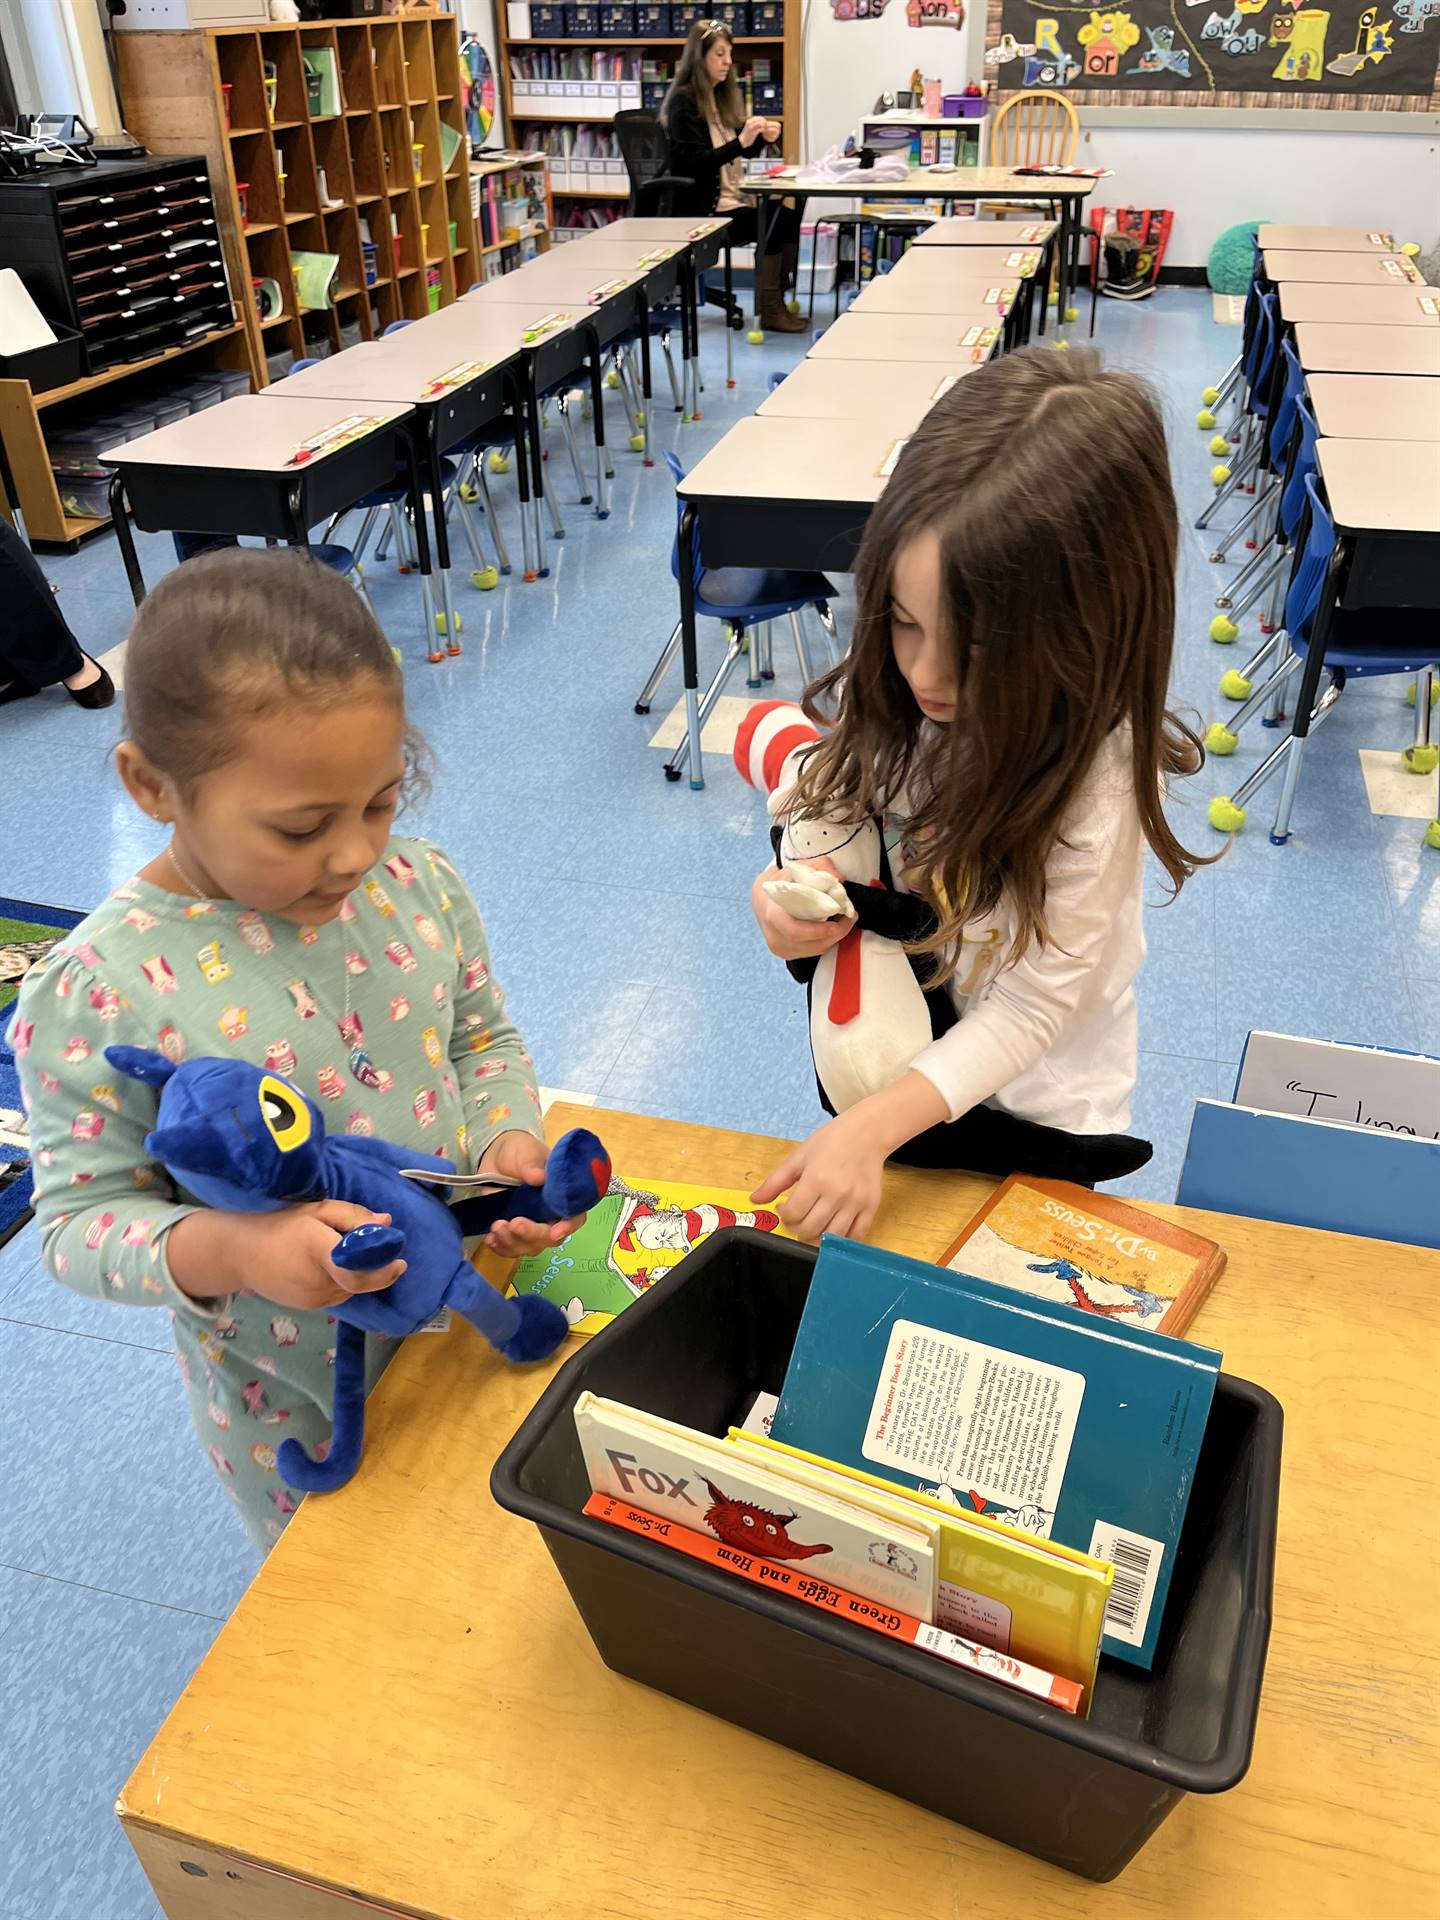 students holding stuffed animals search through books.